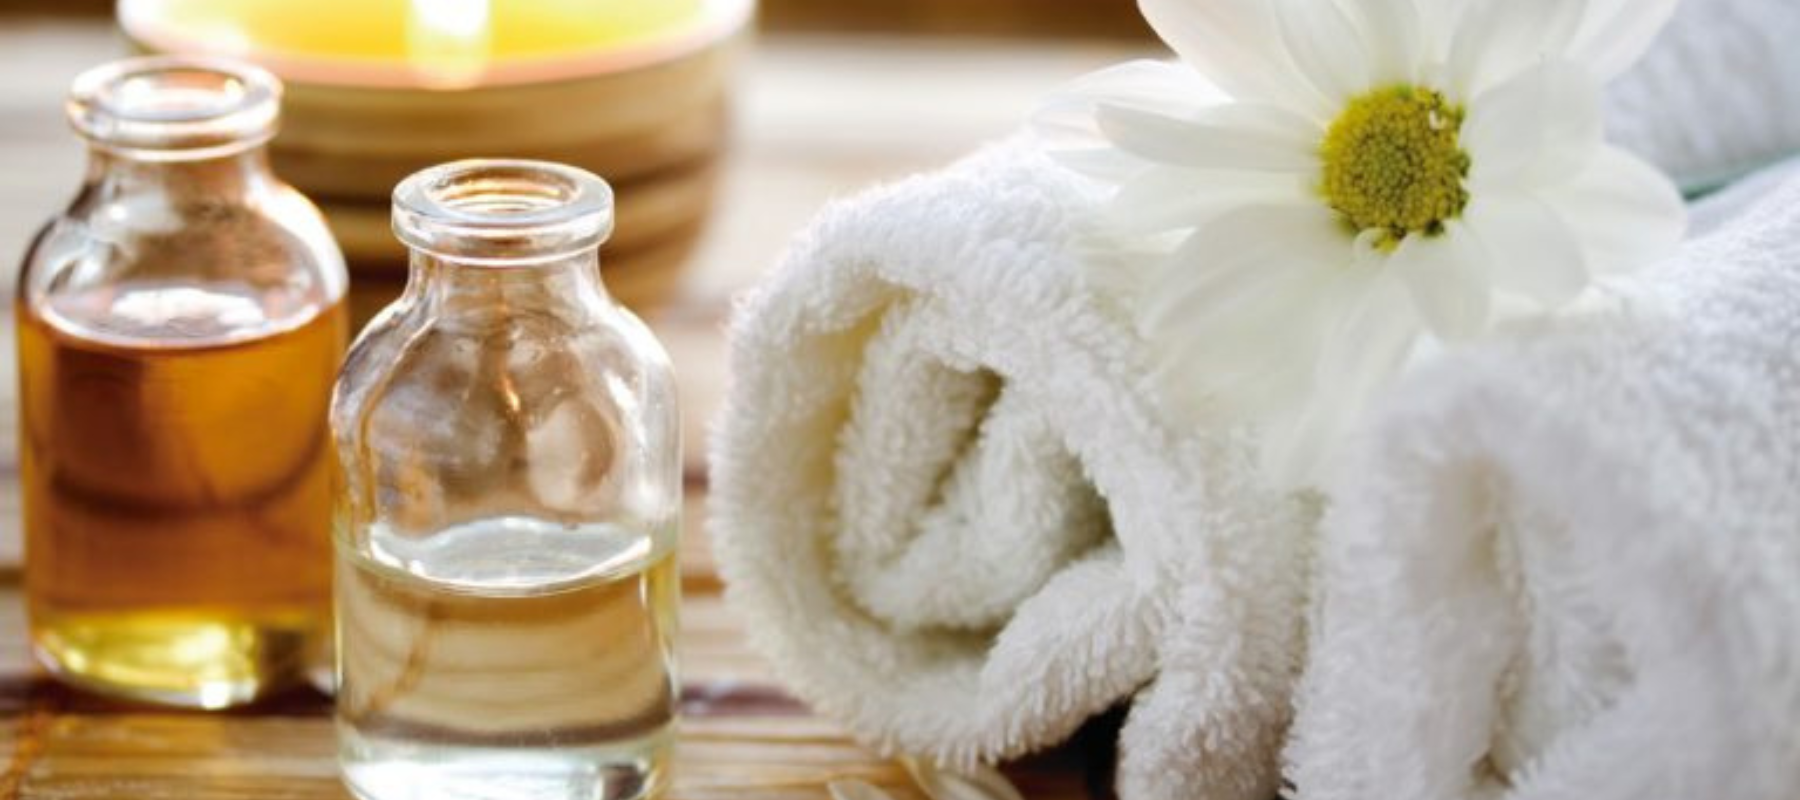 towels and oils